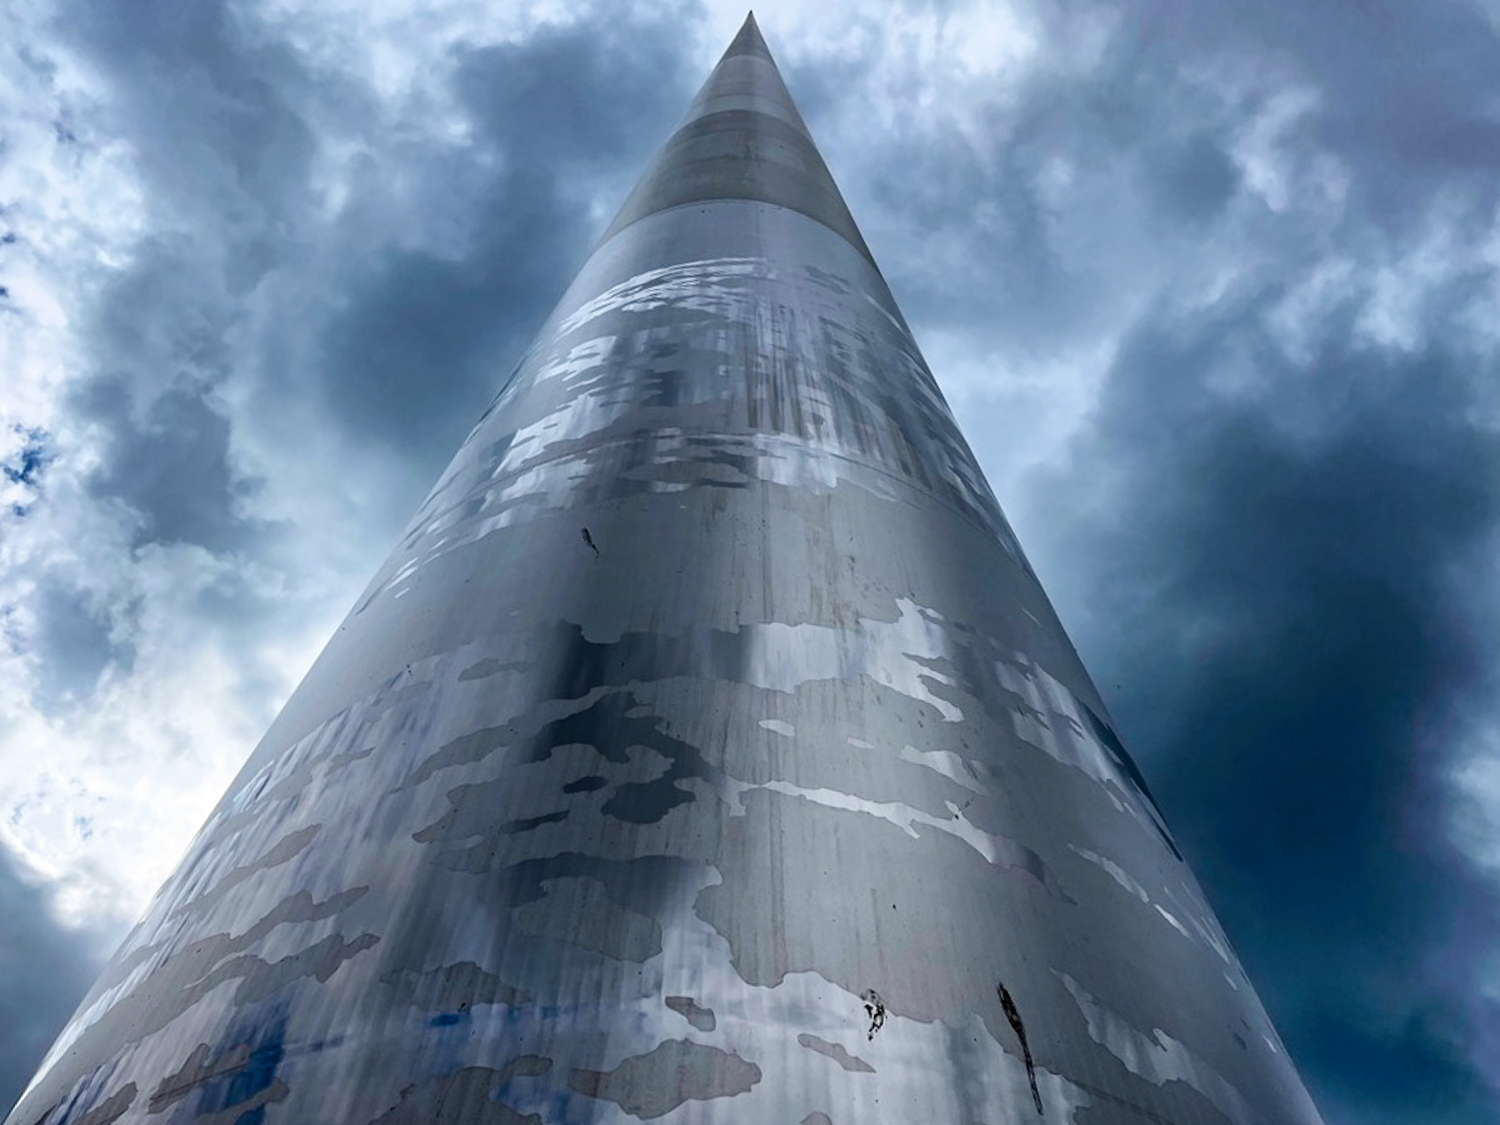 An ominous looking scene, depicting the Spire of Dublin pointing directly towards the sky. From the close-up angle, it looks as though the spire travels upwards for miles. 